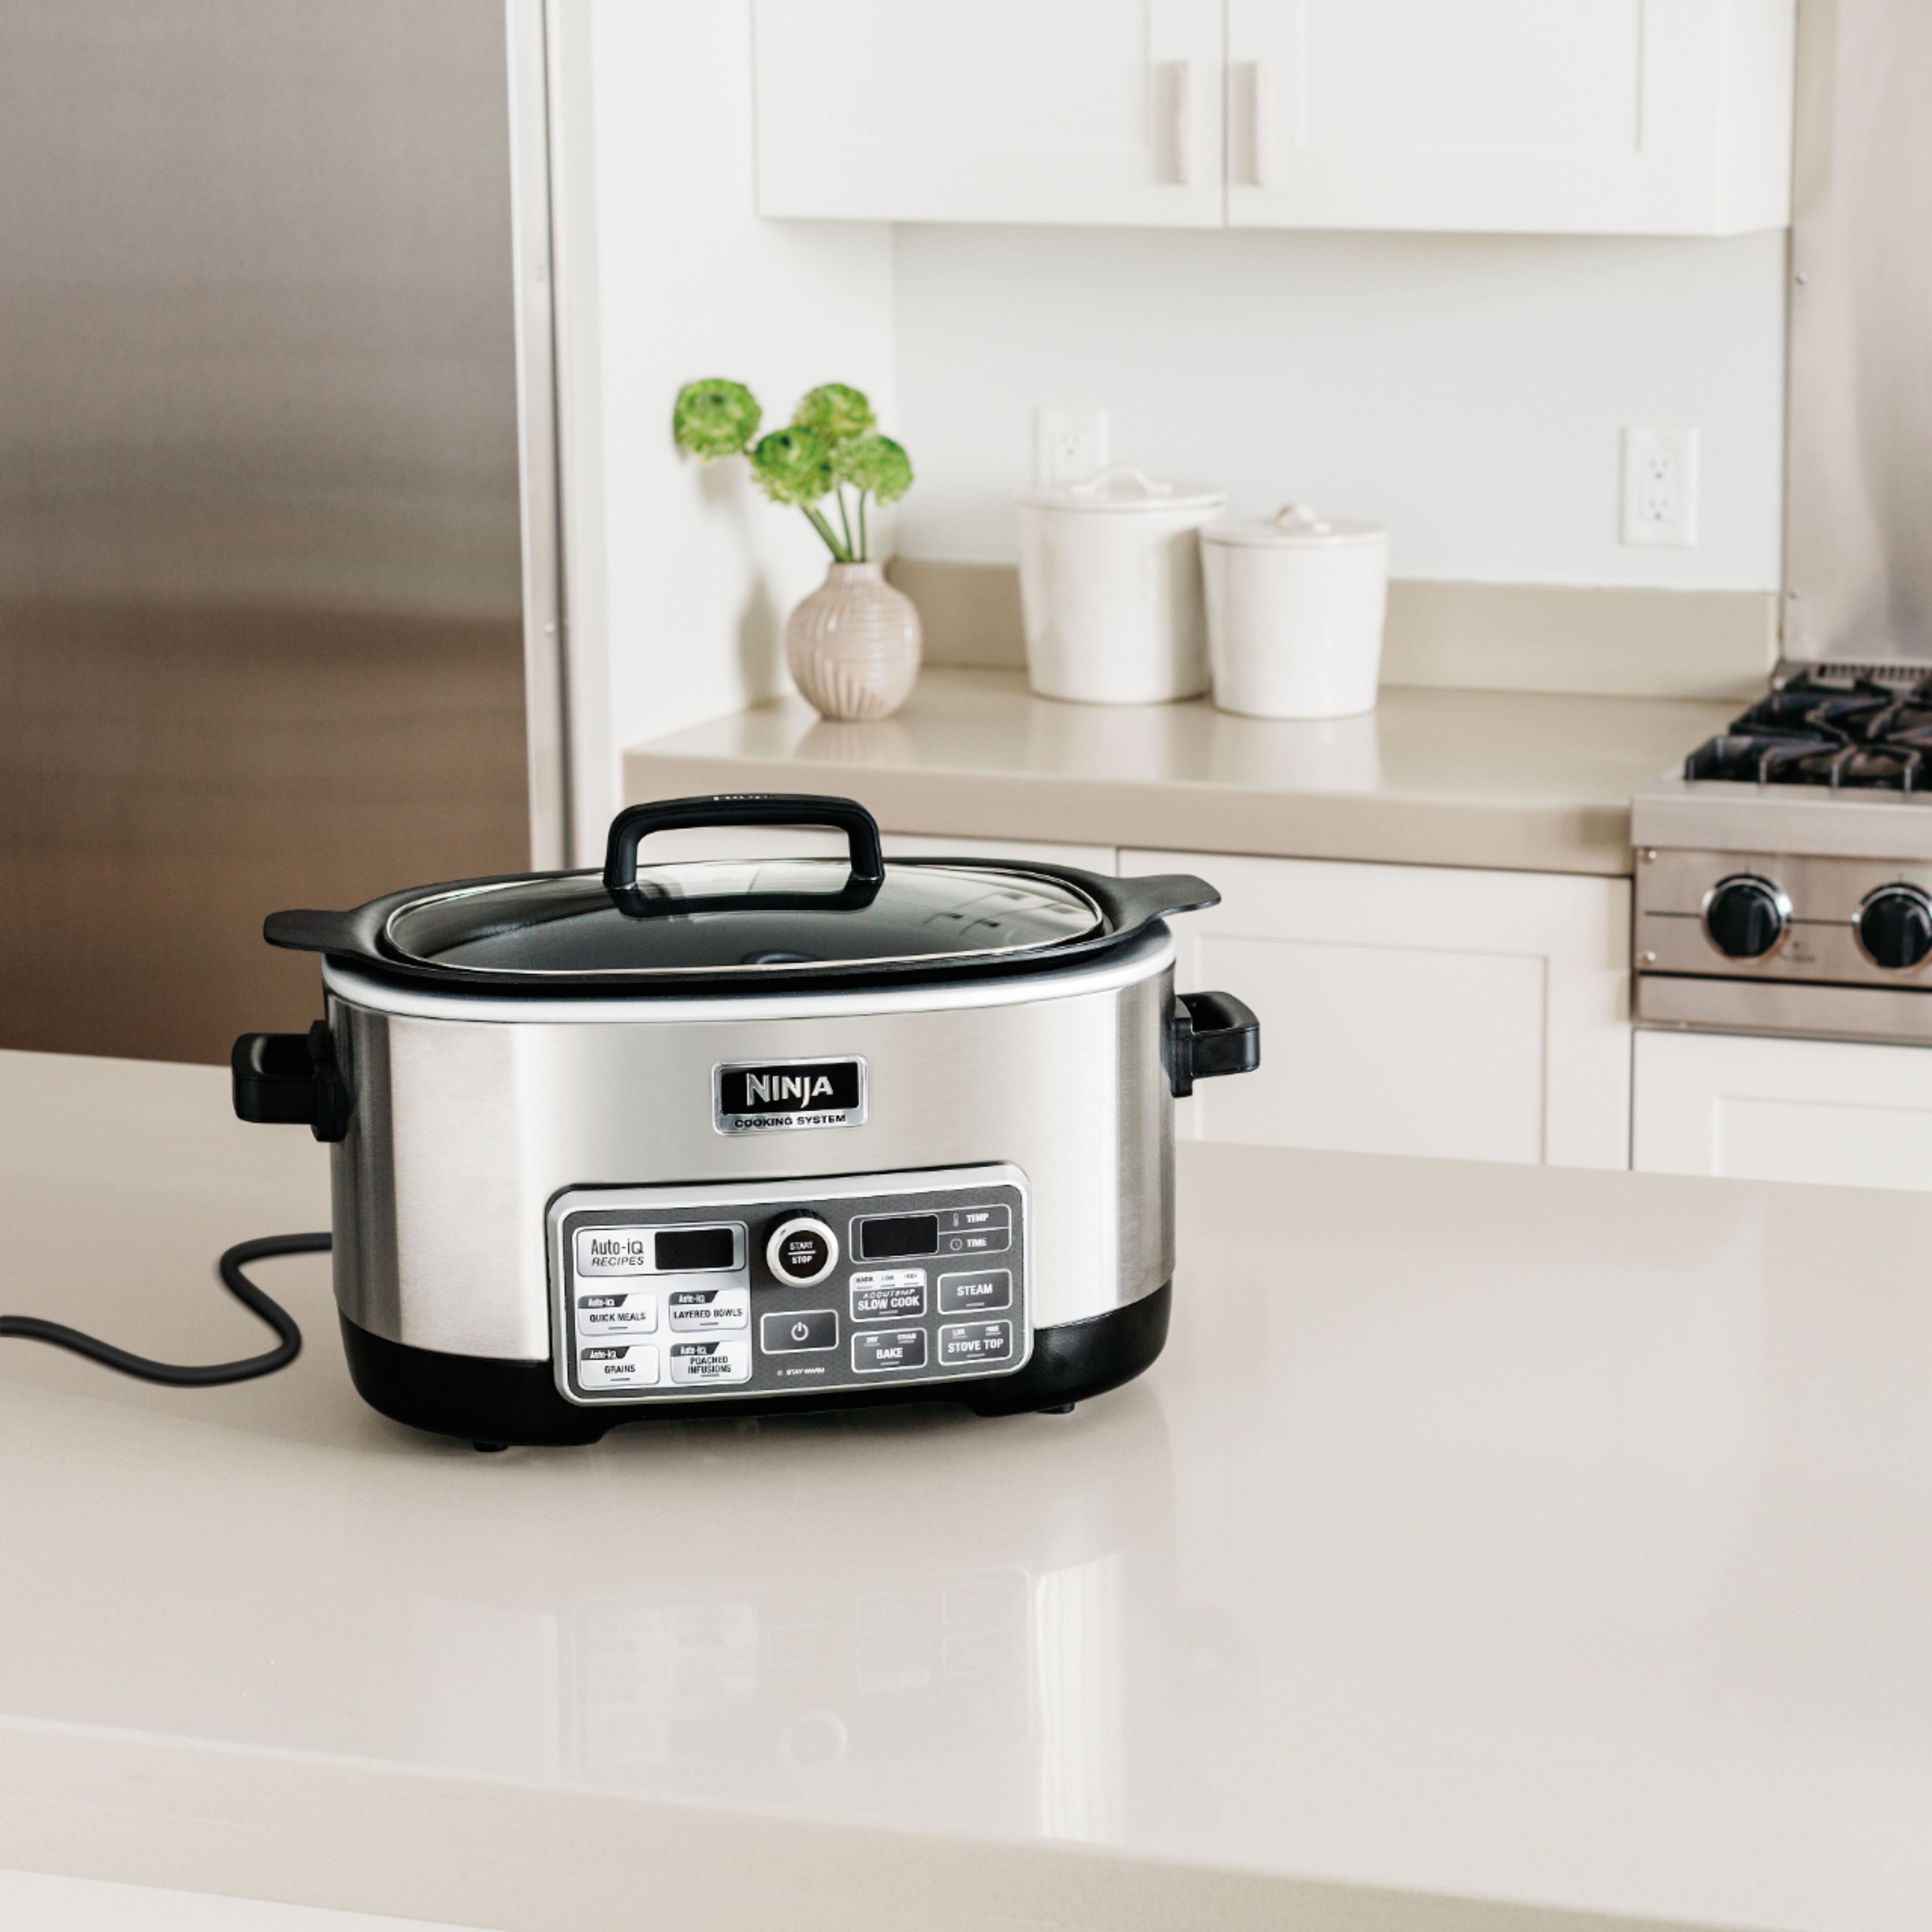 We gave the Ninja multi-cooker 5 stars and it's available with £20